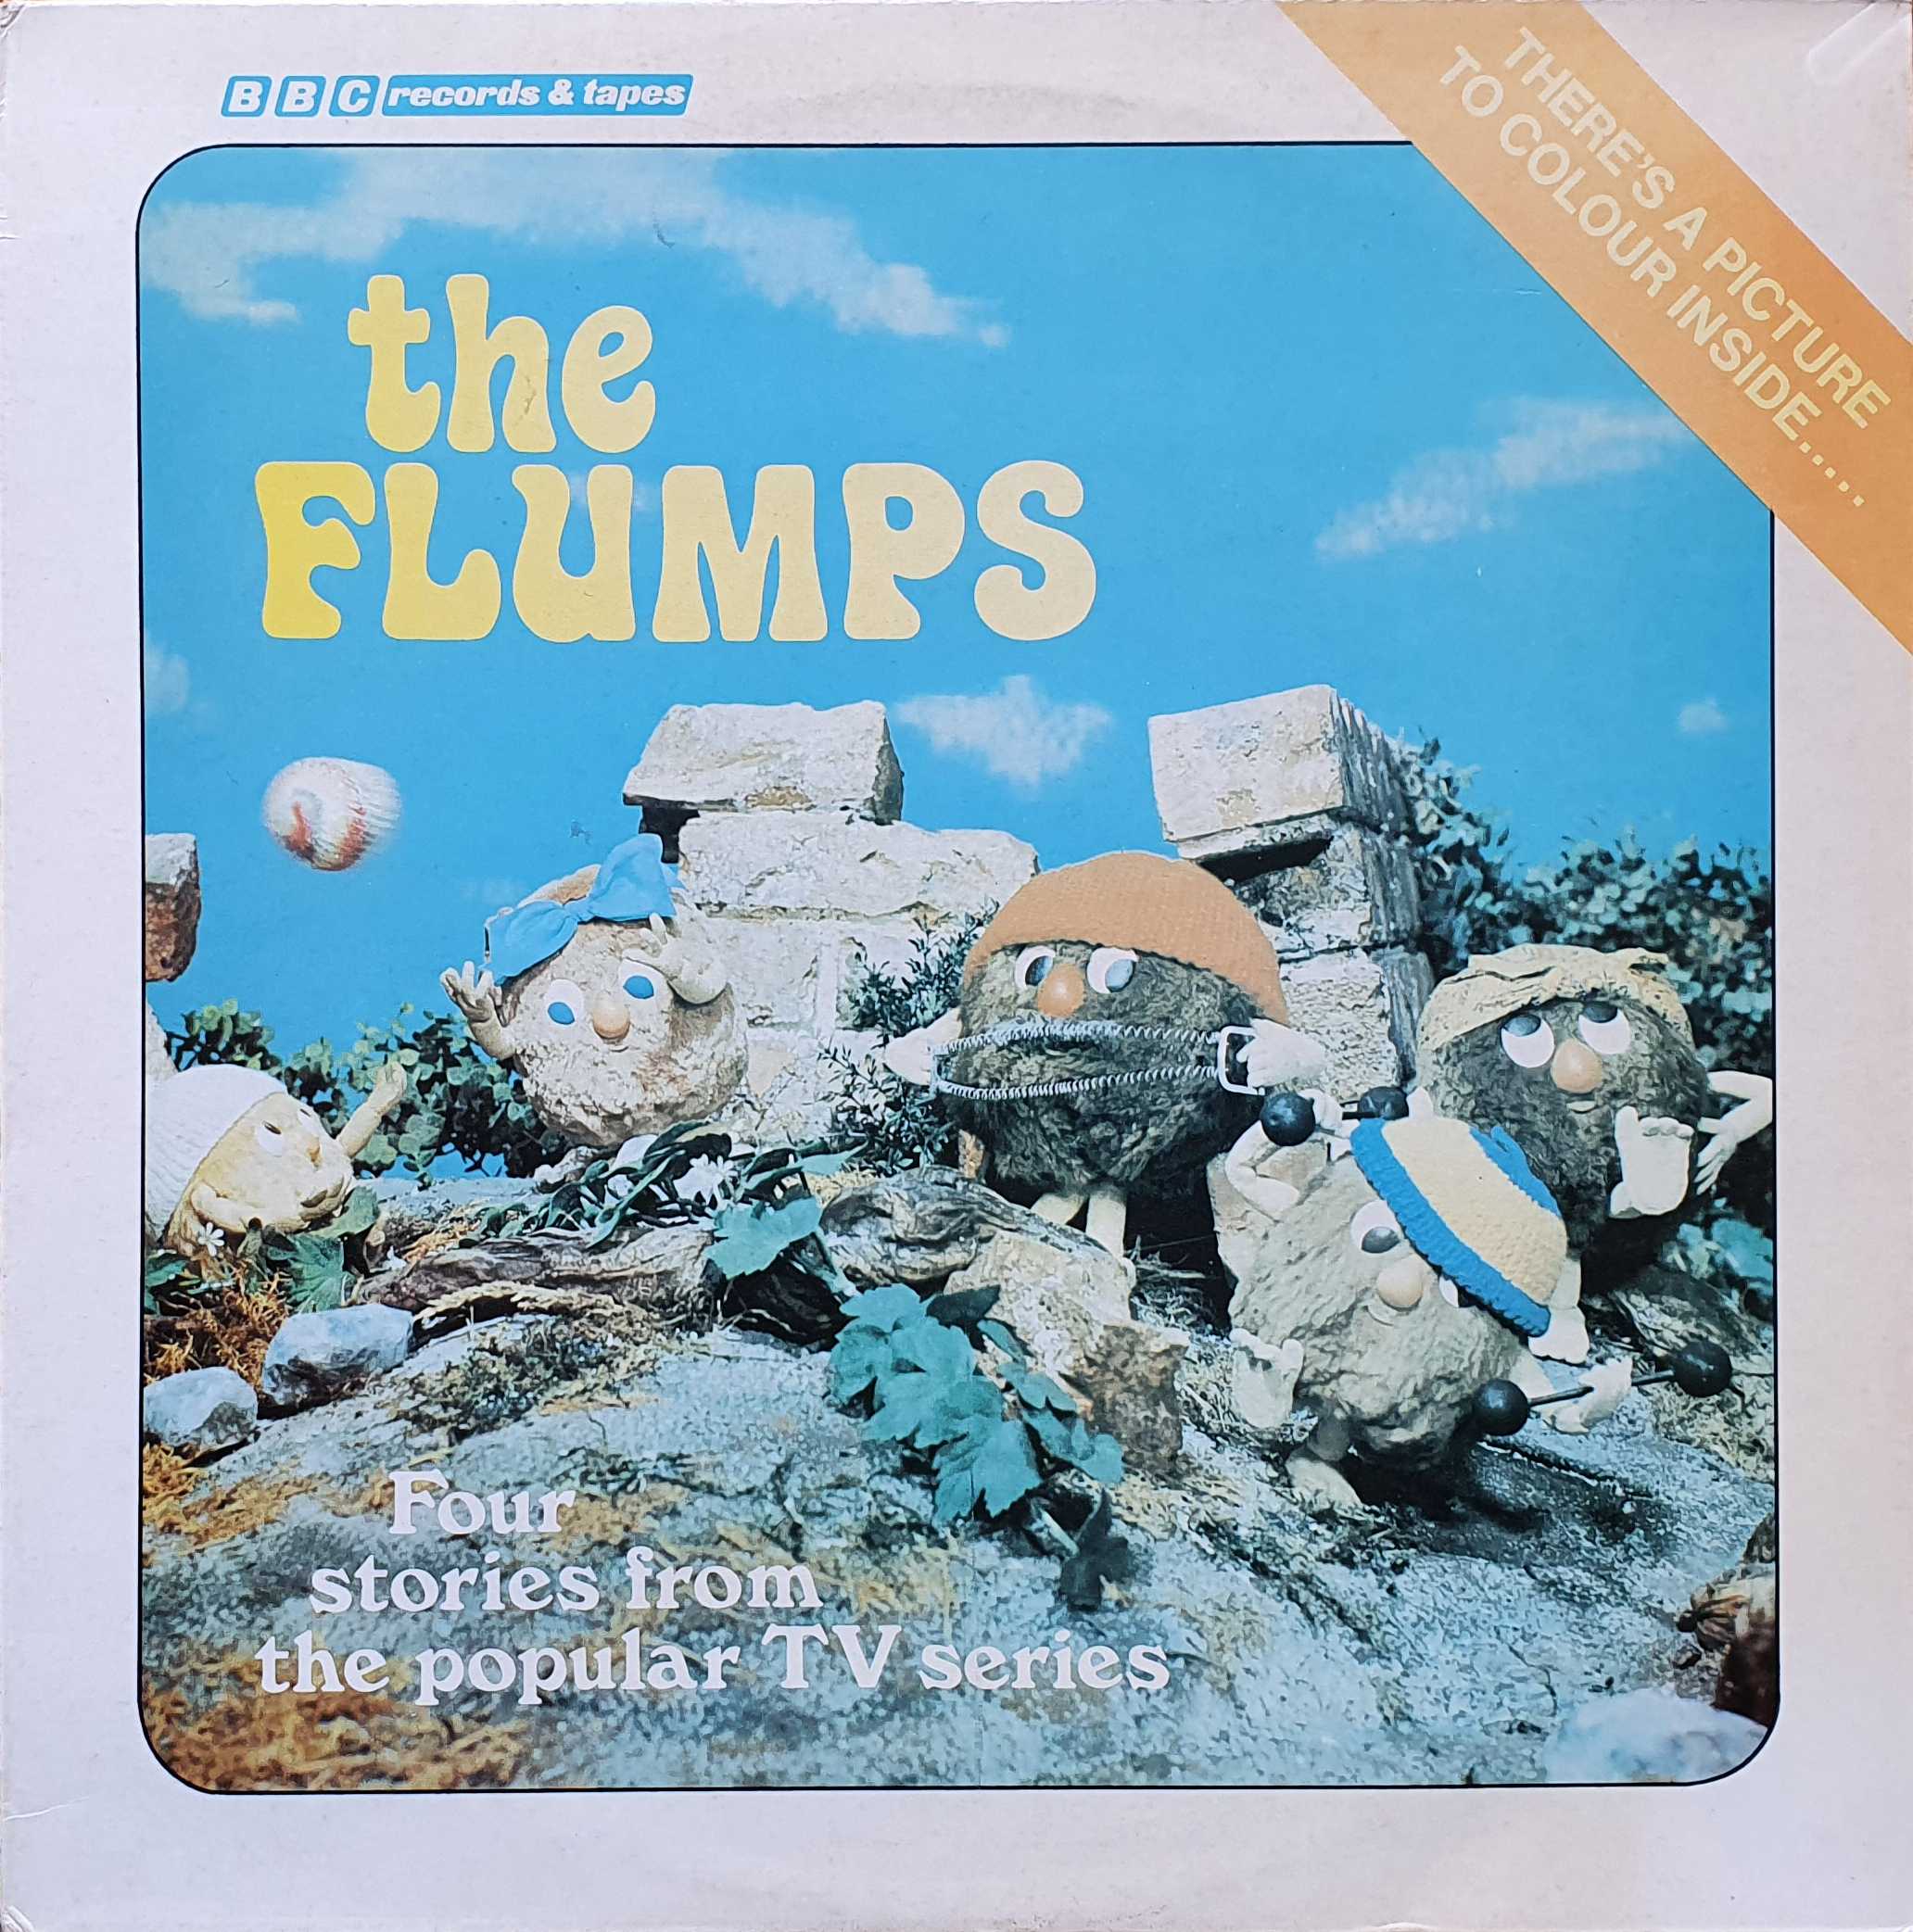 Picture of REC 309 The Flumps by artist Julie Holder from the BBC albums - Records and Tapes library